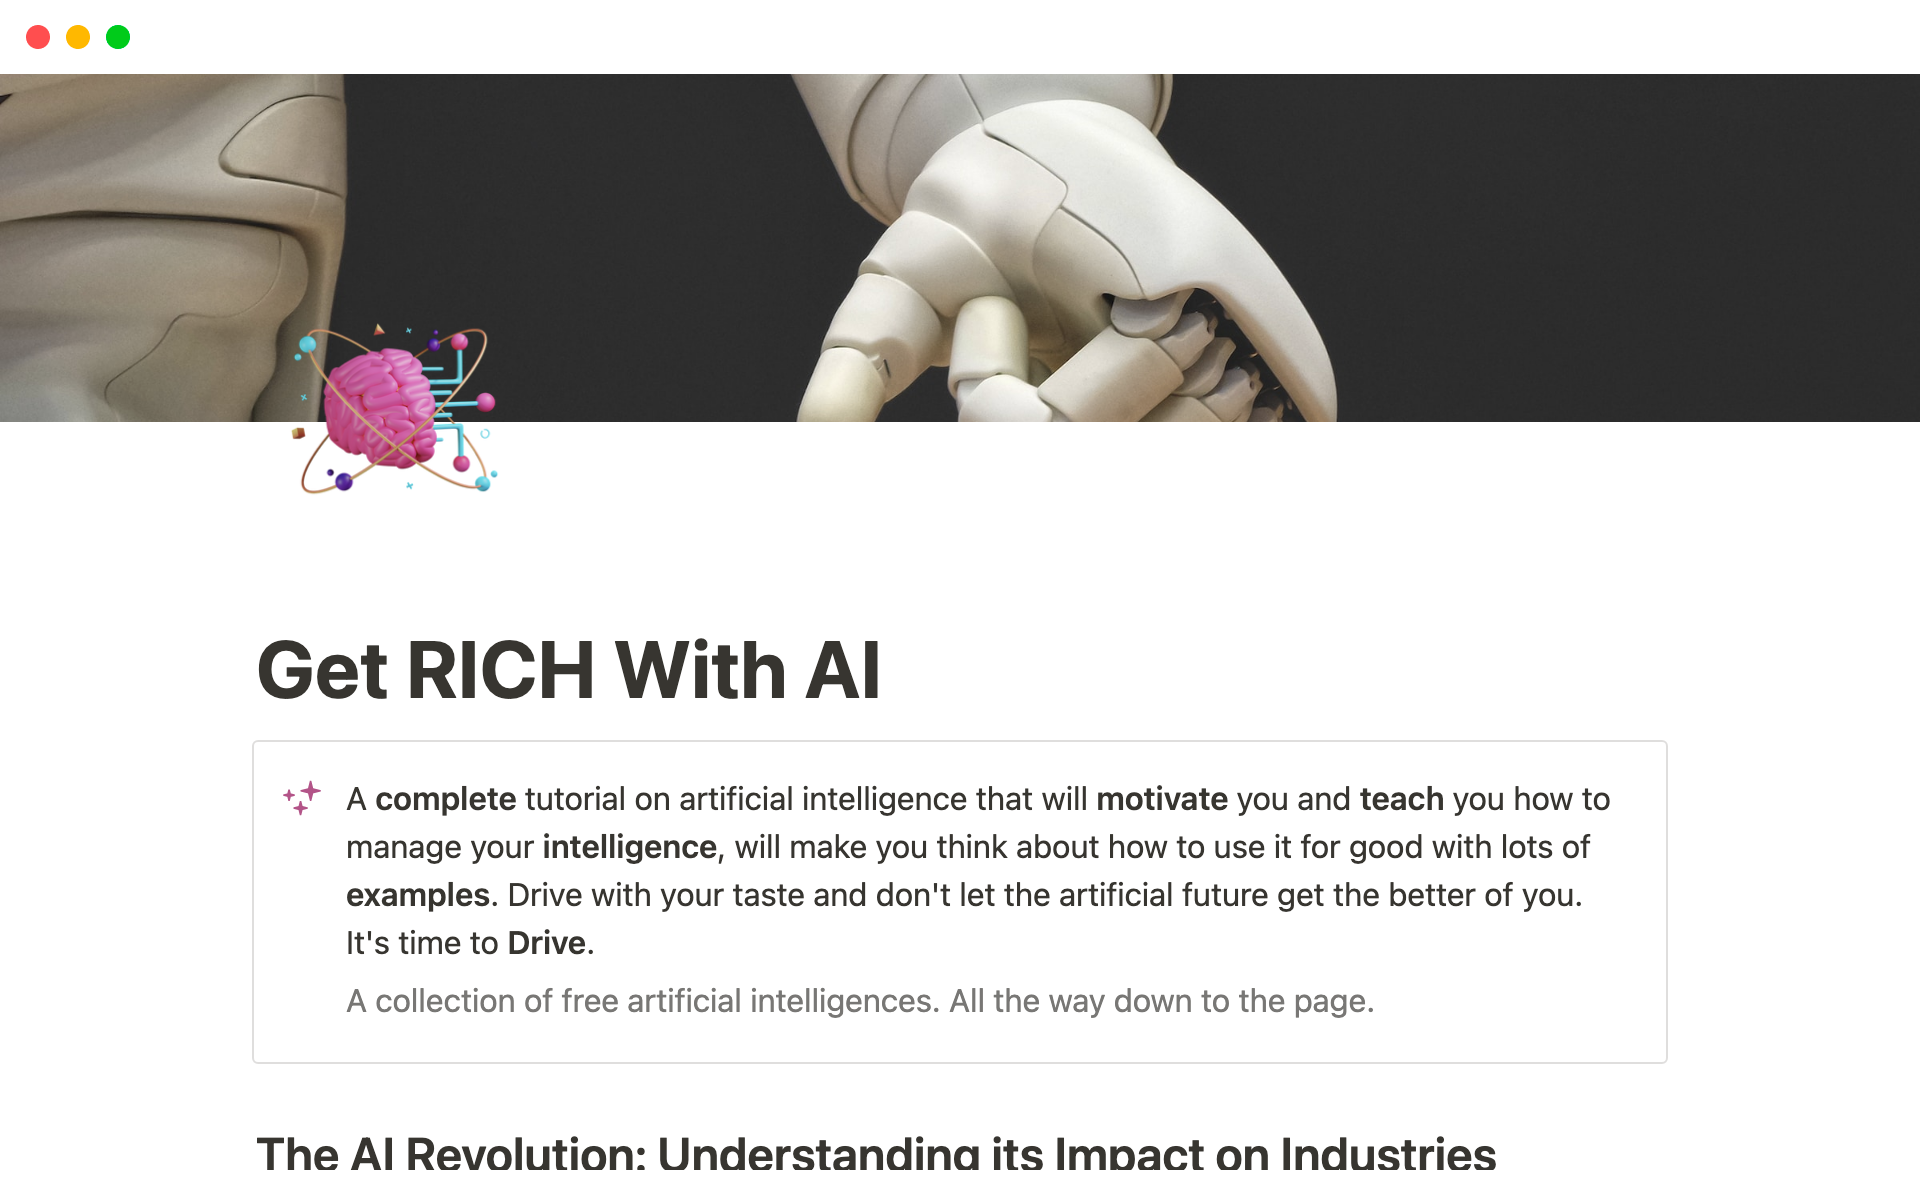 the RICH With AI Notion template is a comprehensive and valuable tool for anyone interested in exploring artificial intelligence.